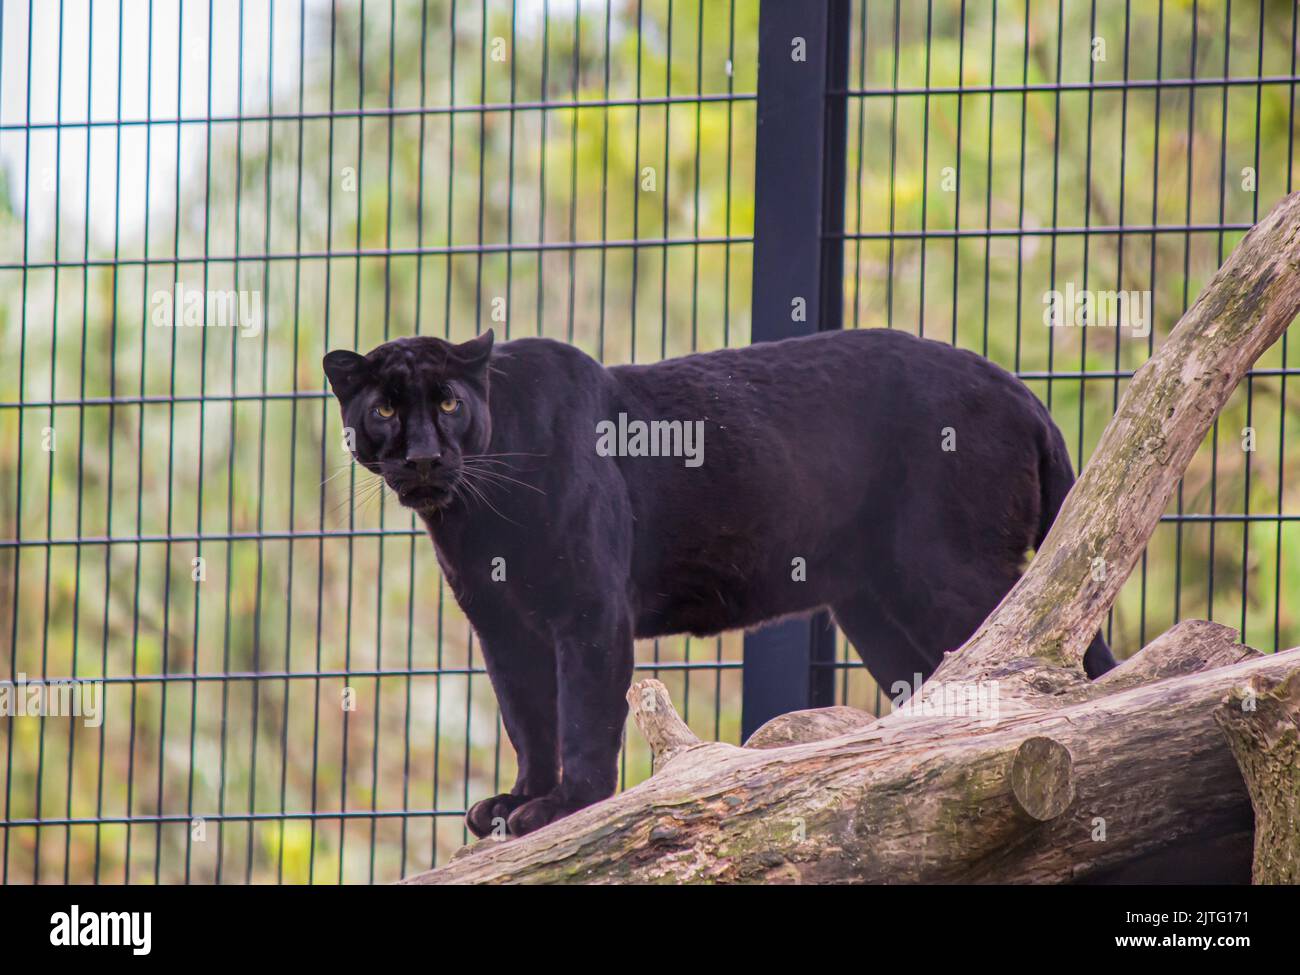 A black jaguar standing on the log in a cage Stock Photo